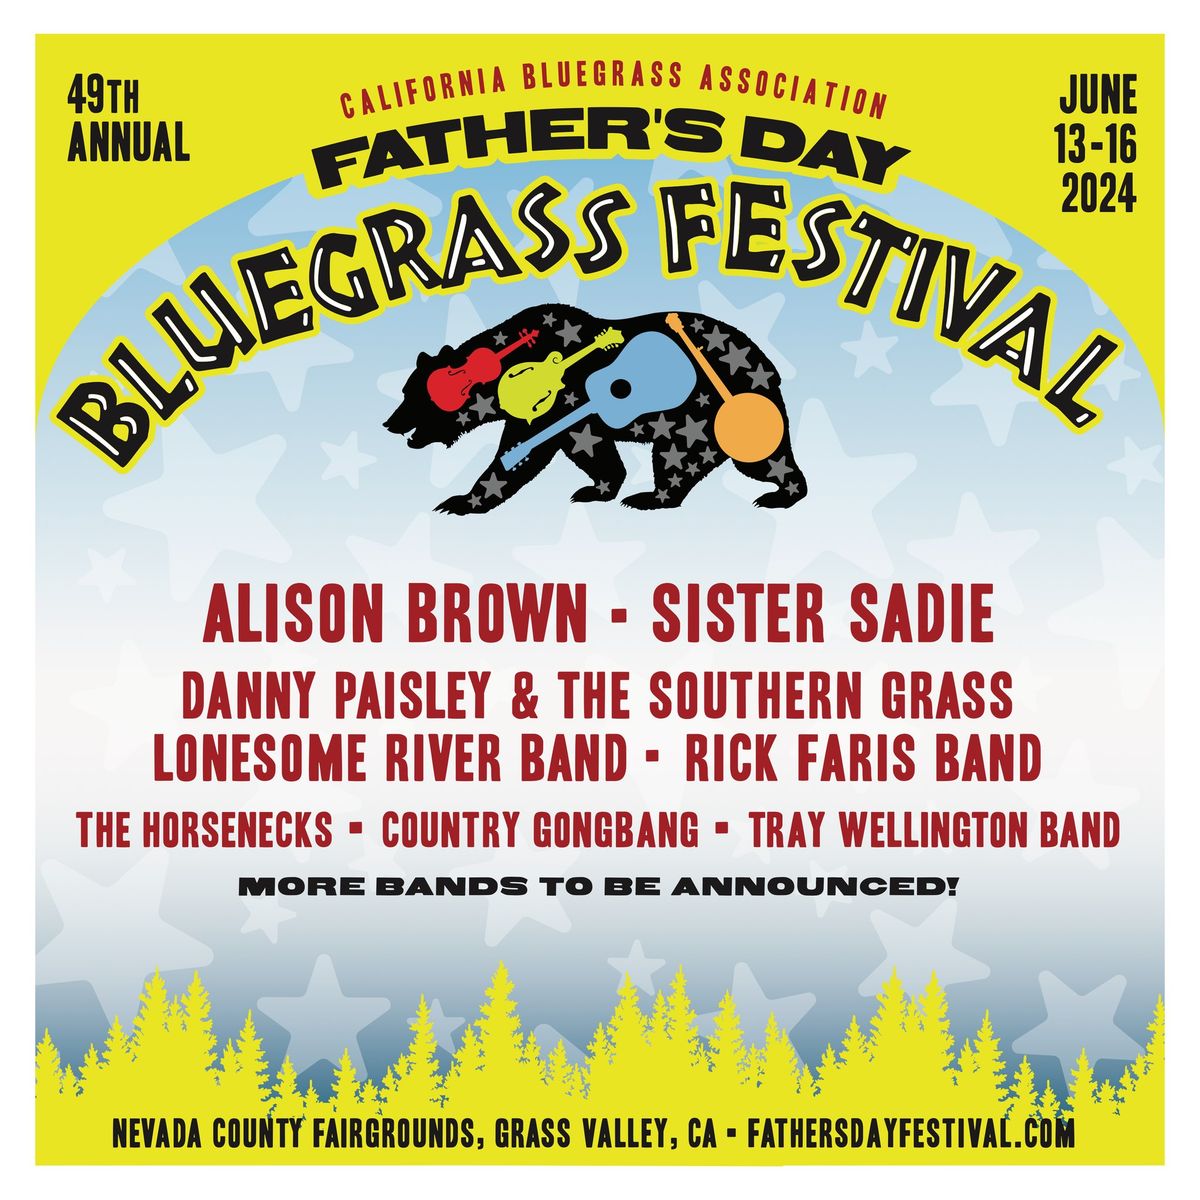 Father's Day Bluegrass Festival 2024